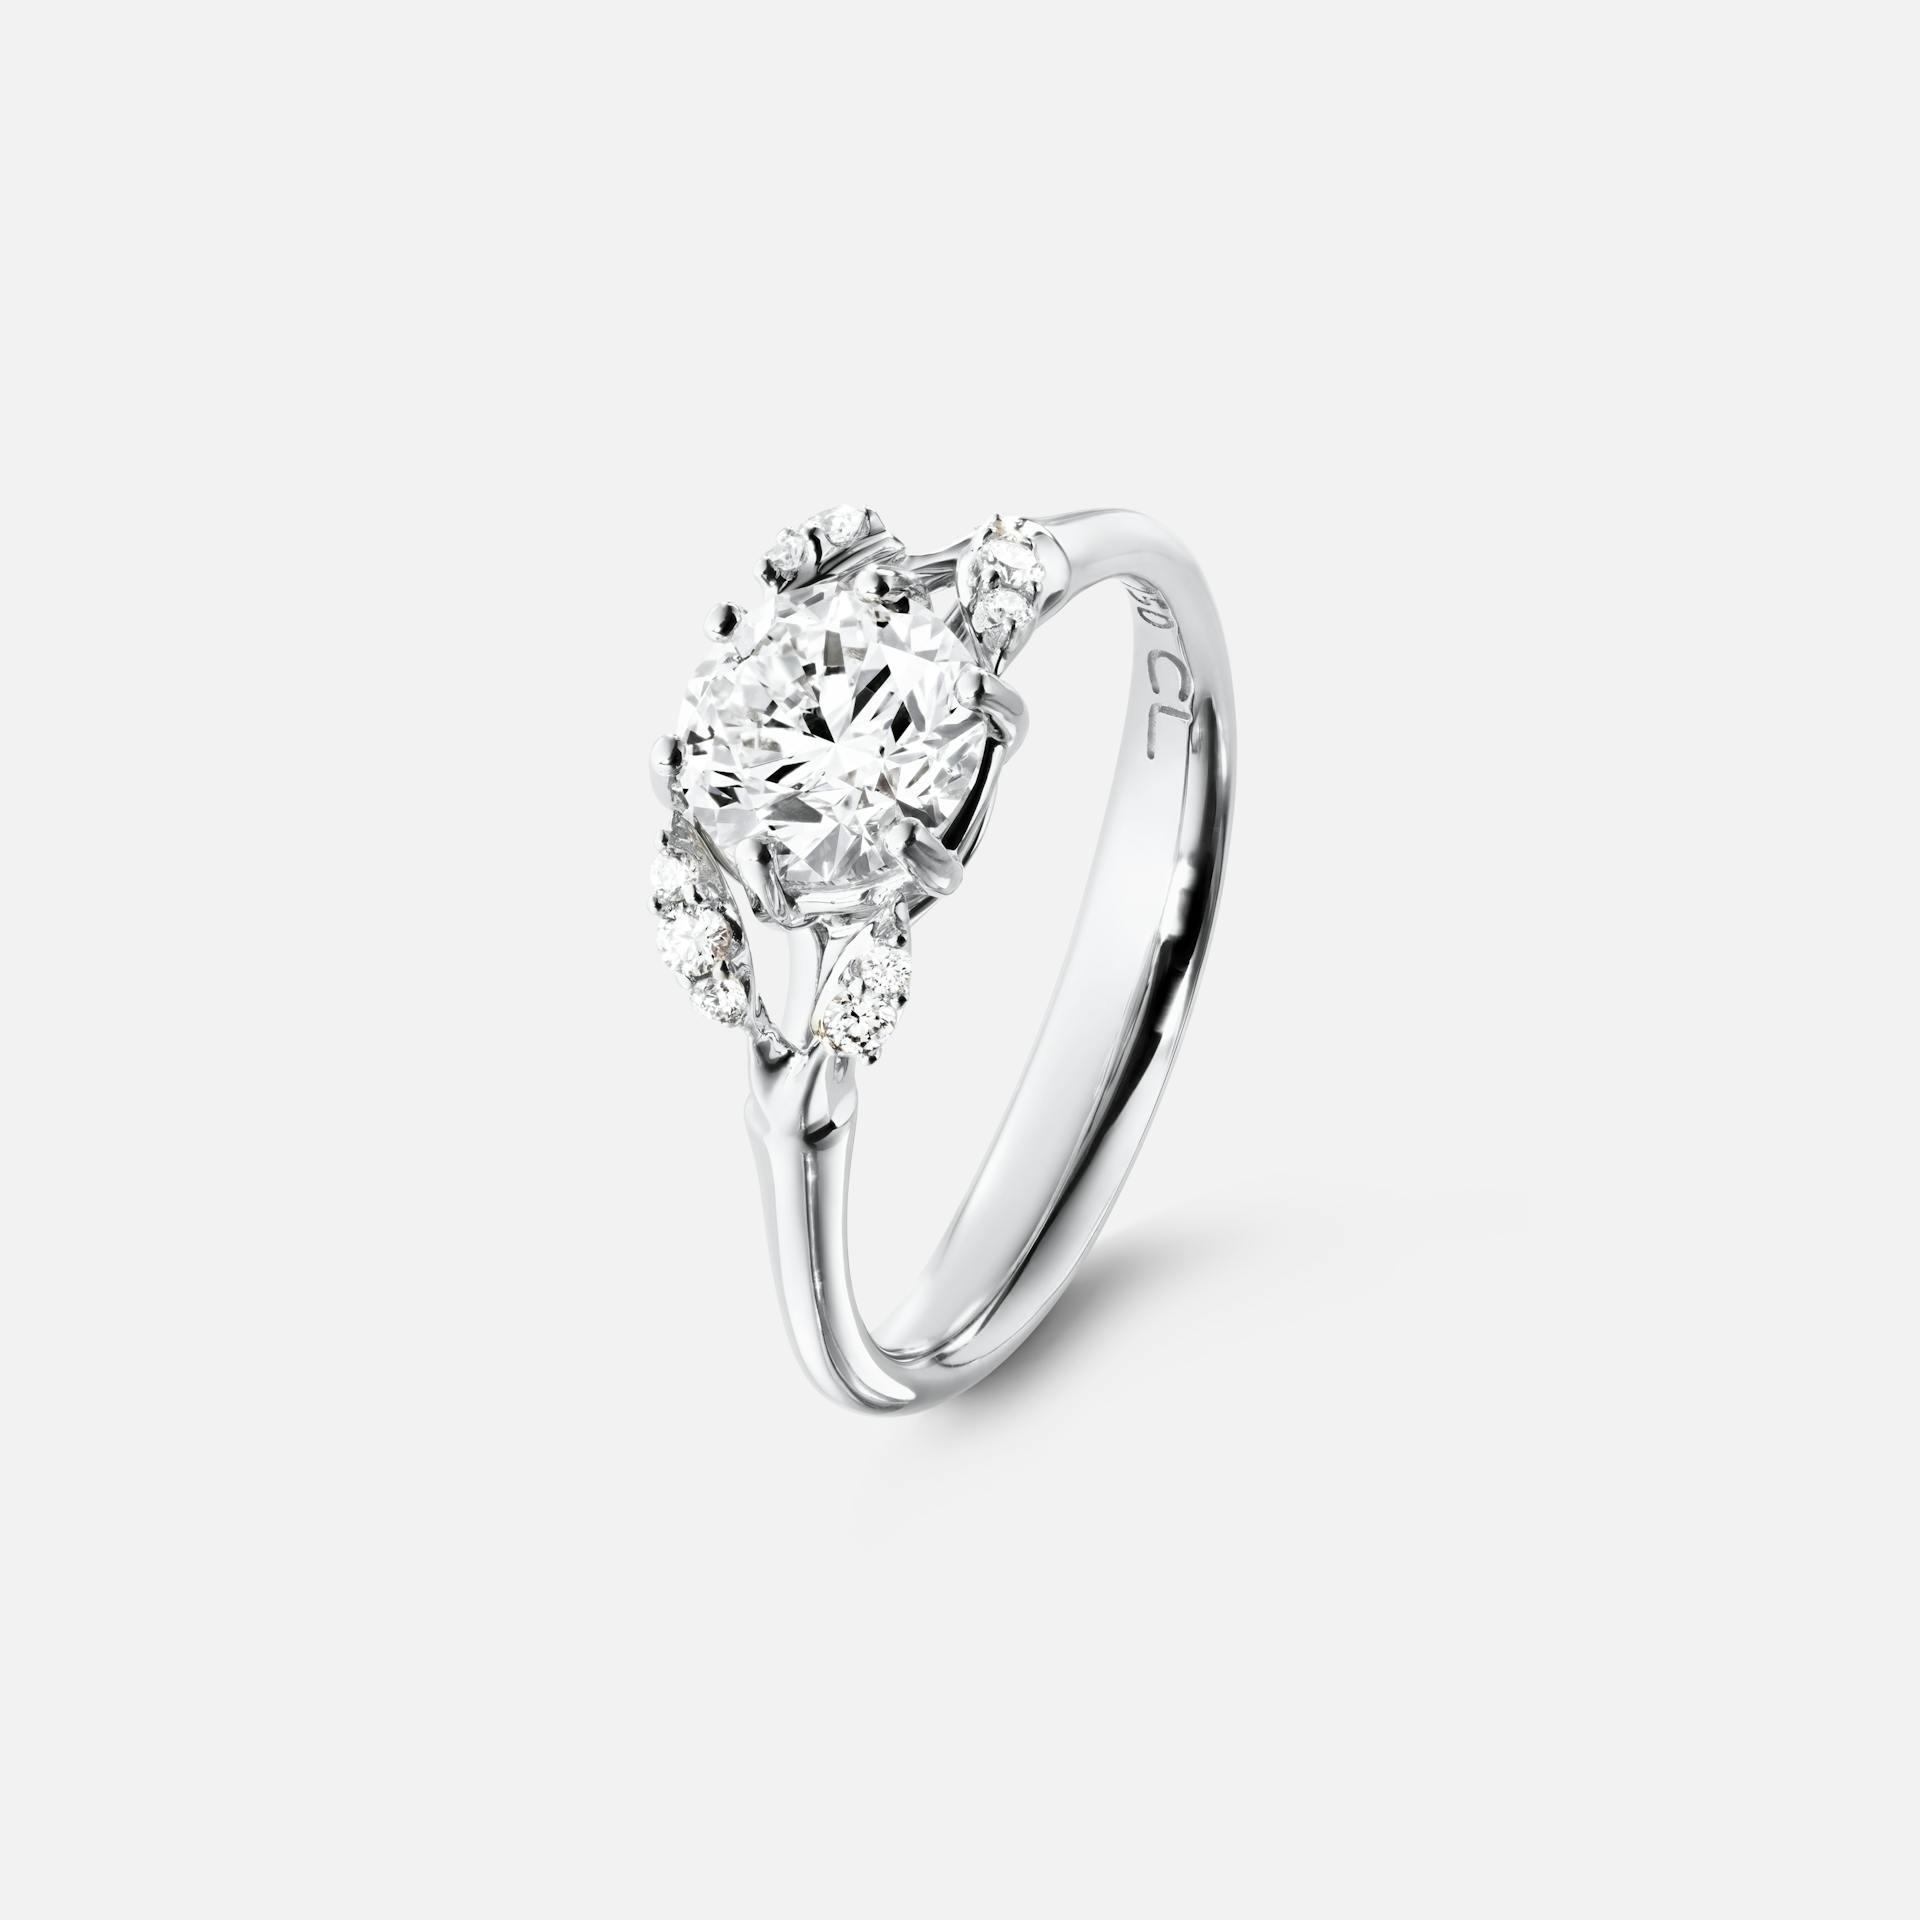 Solitaire ring slim 18k white gold set with a brilliant-cut diamond from 0.80 ct. TW. VS.